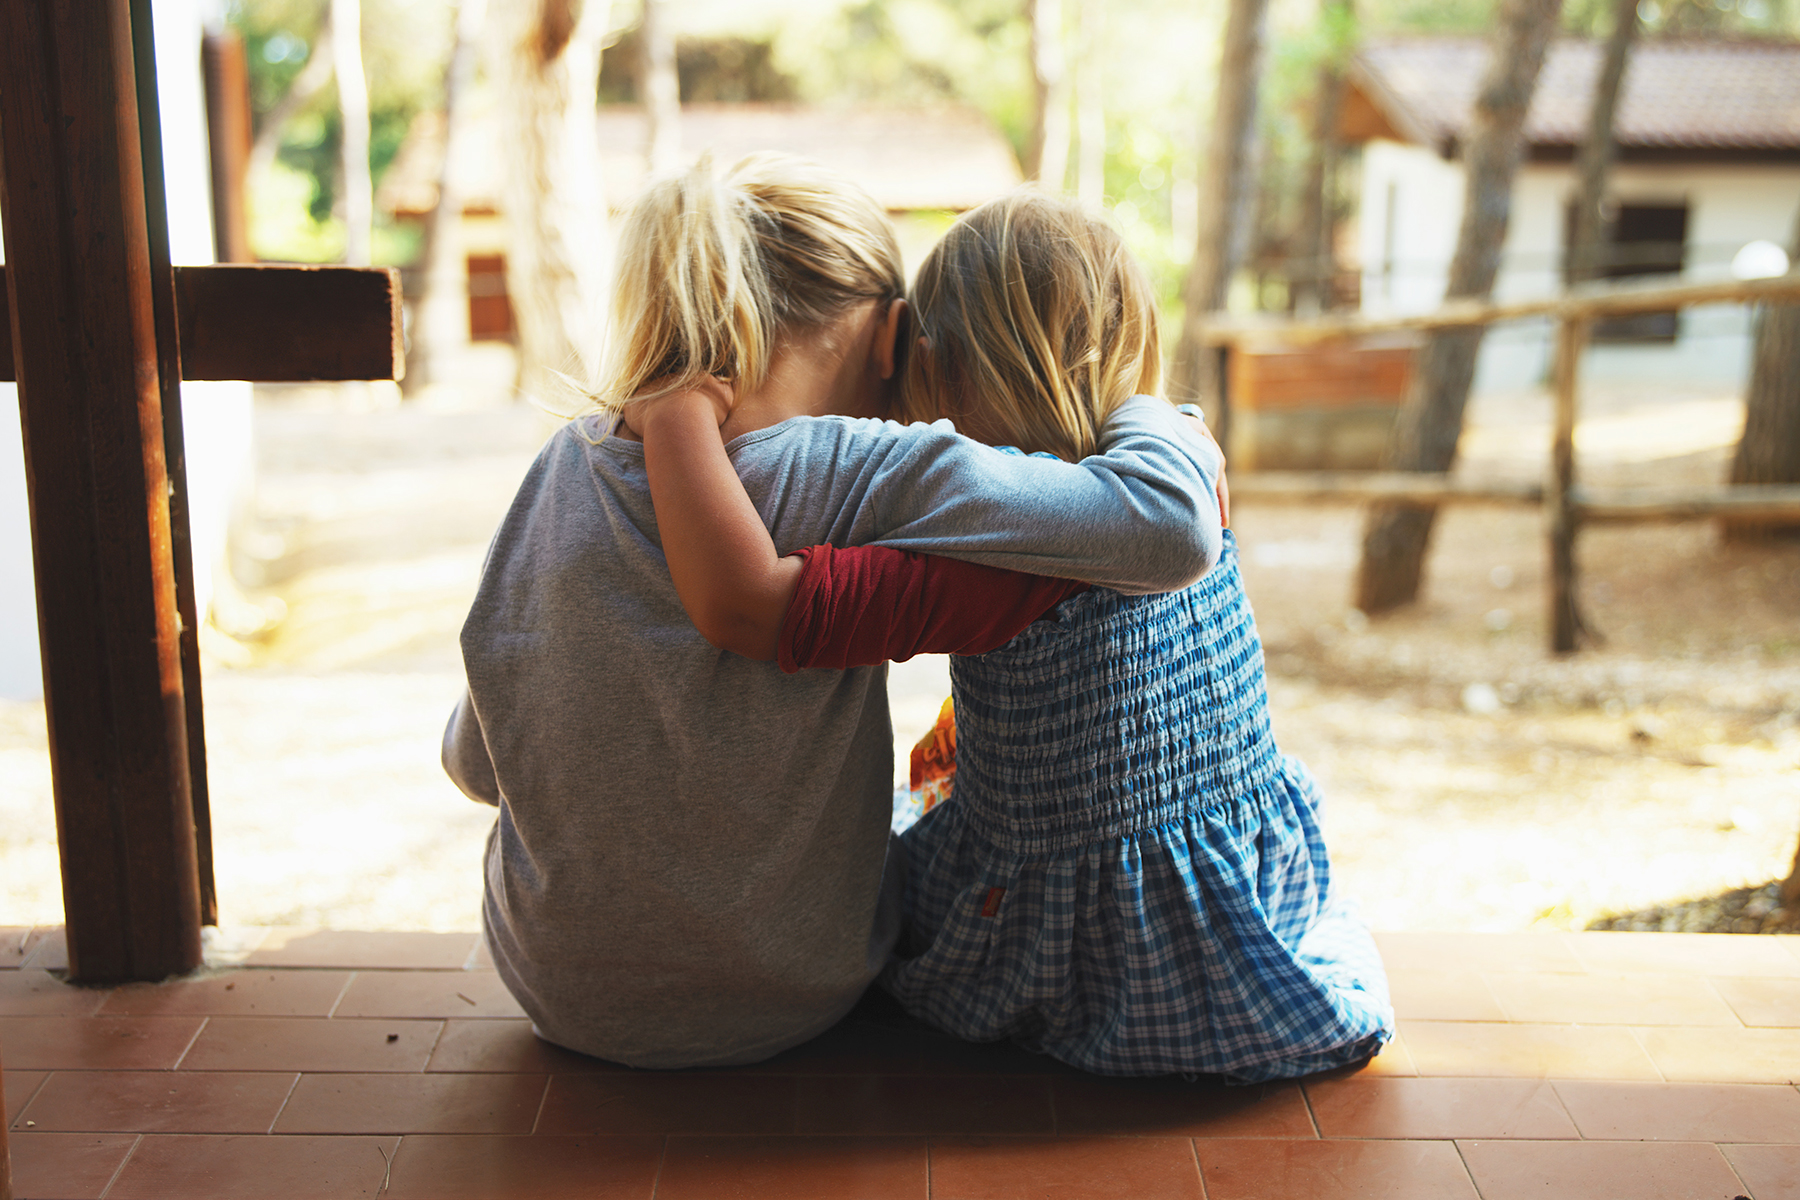 A photo of two young girls, sitting on a porch on a sunny day hugging and comforting each other.